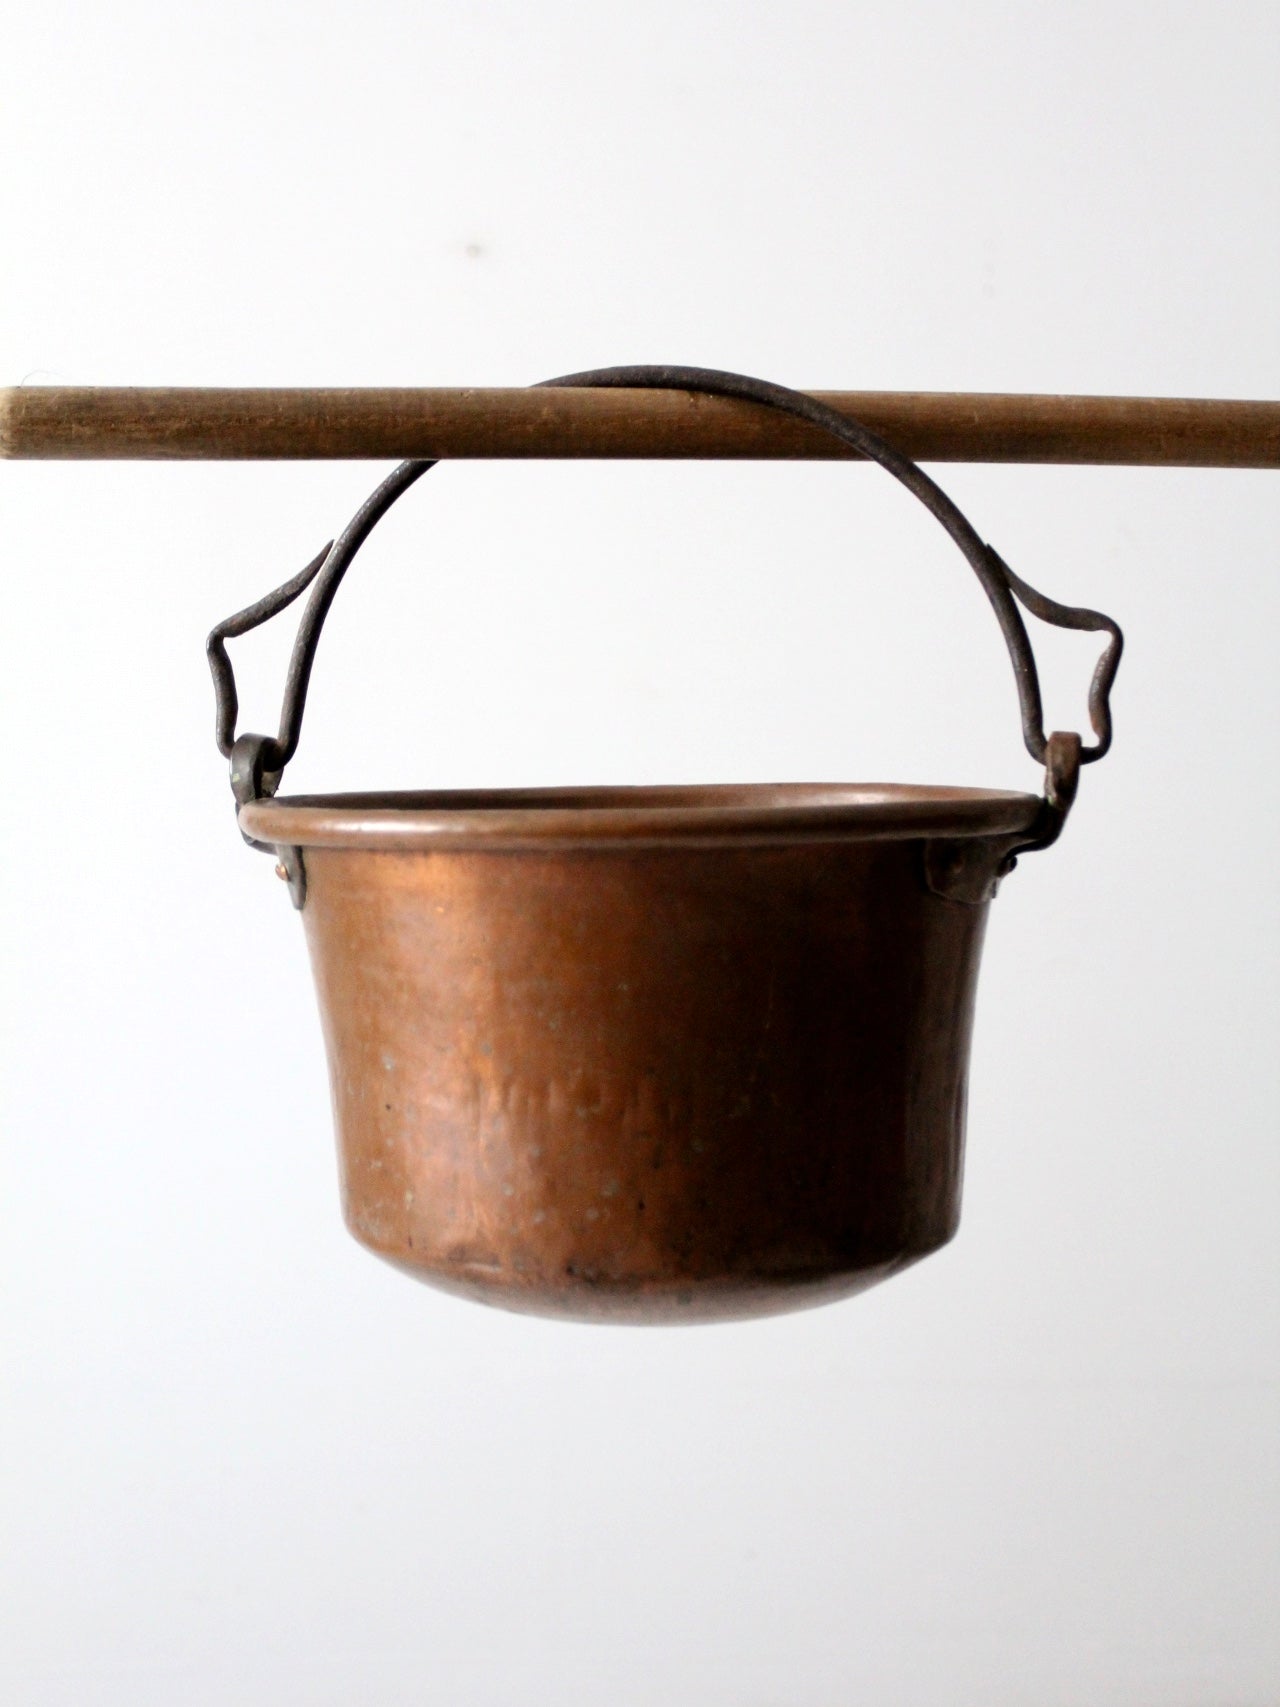 Giant Industrial Antique Copper Cauldron Round Bottom Candy Kettle